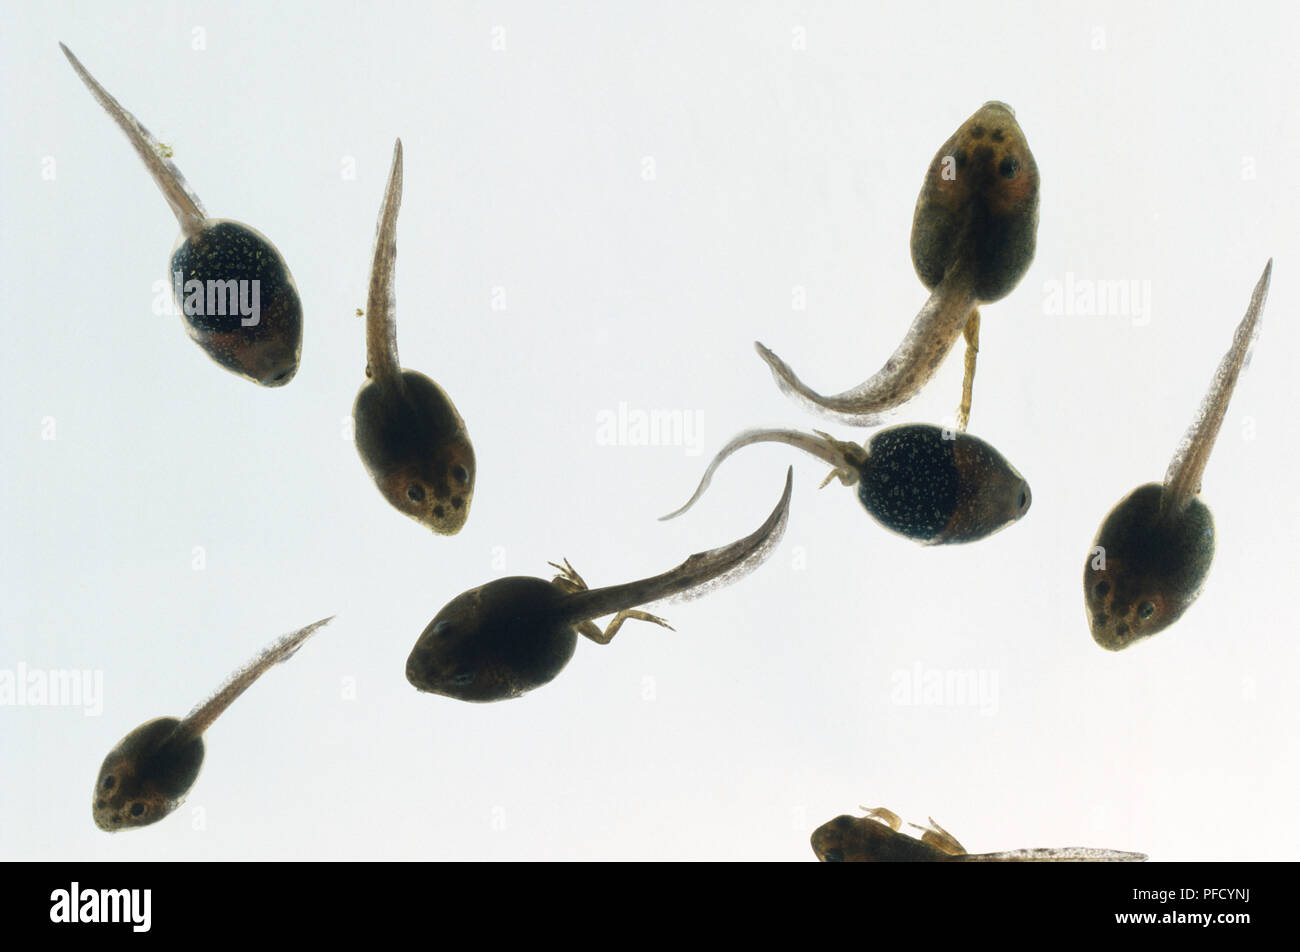 Group of tadpoles swimming, legs developing, large head, above view. Stock Photo